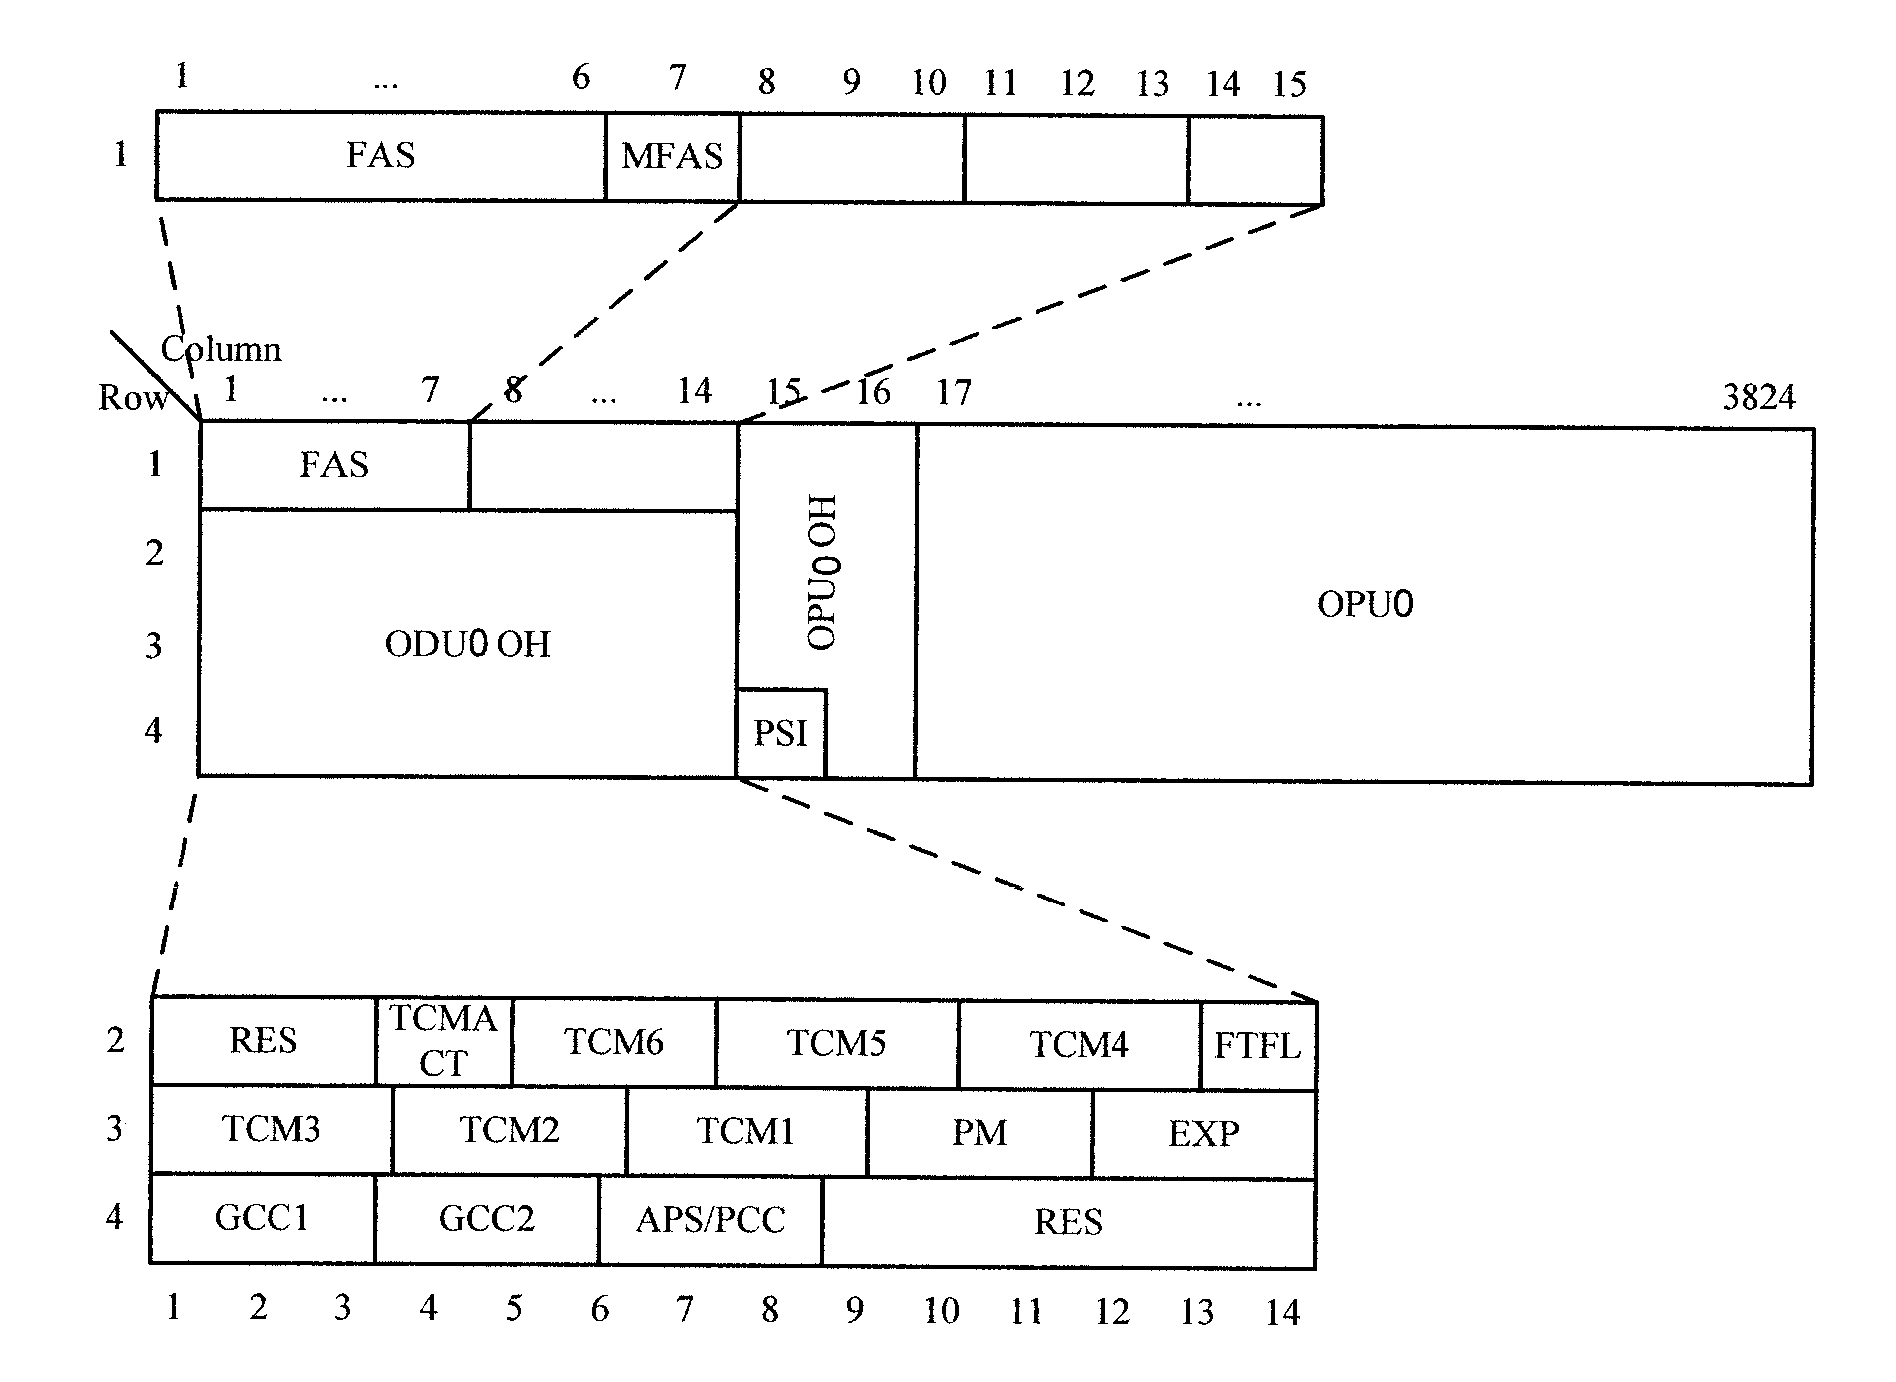 Method and Device for Transmitting Low Rate Signals Over an Optical Transport Network